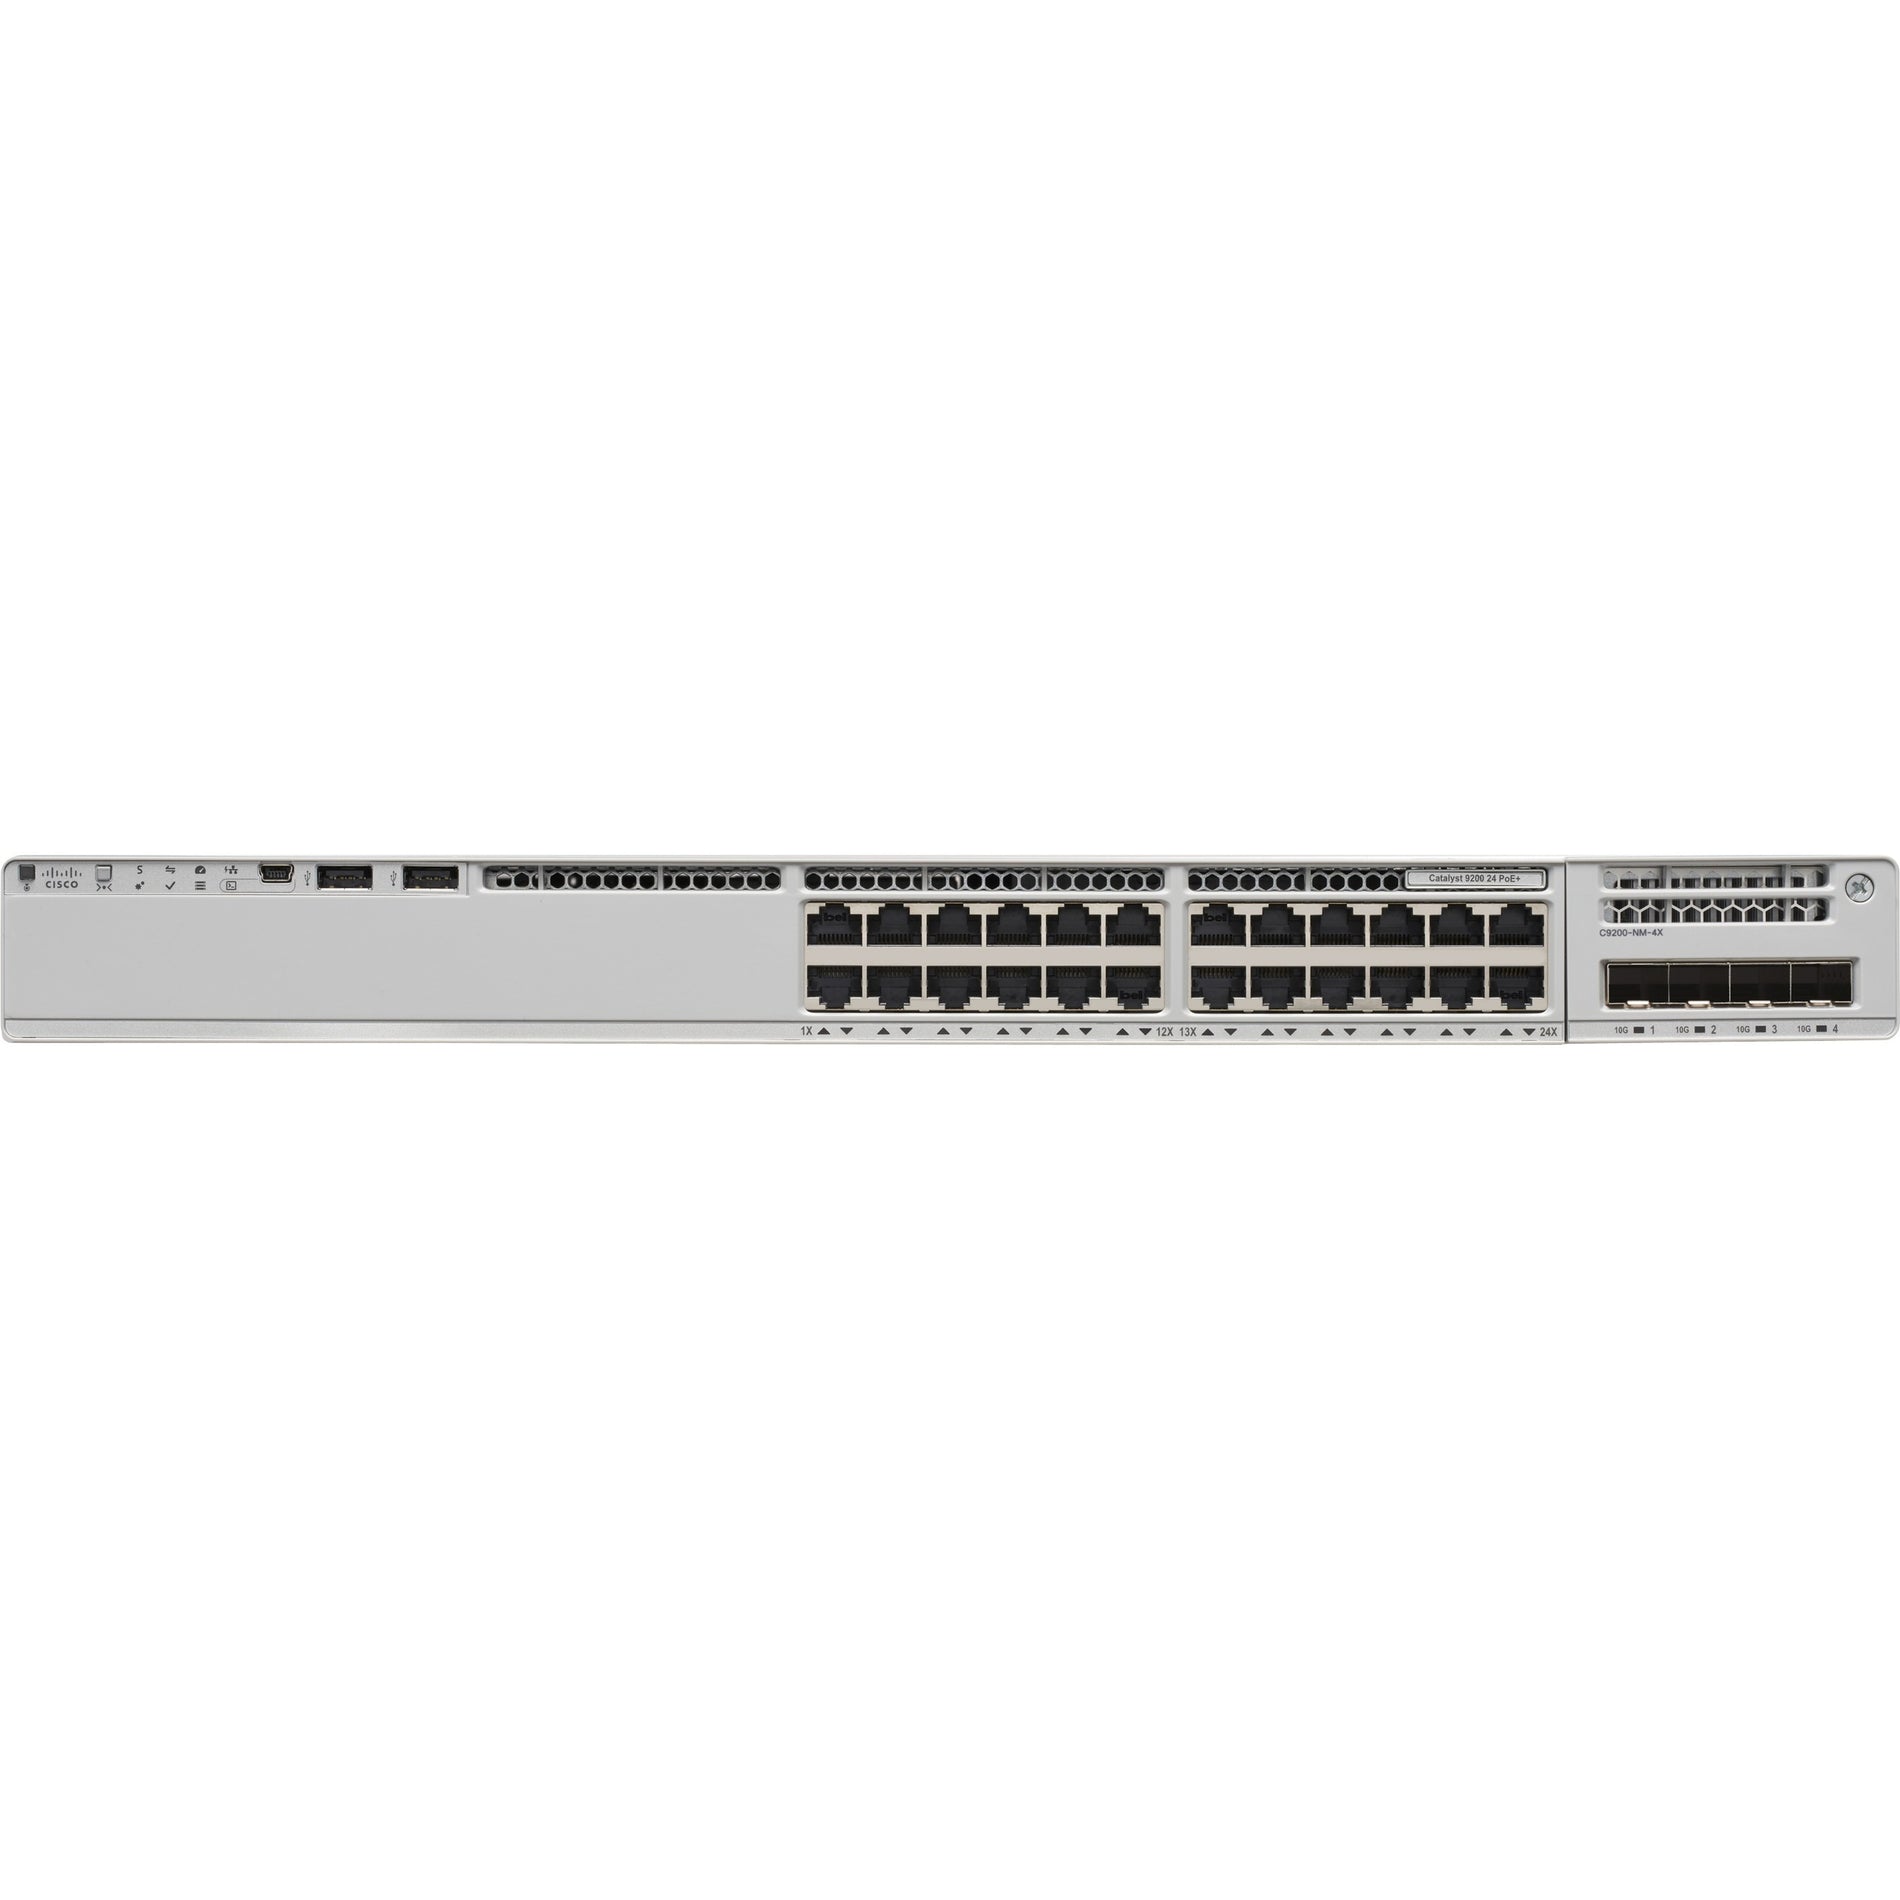 FACTORY DIRECT ITEM - FOR CONFIGURATIONS ONLY - Catalyst 9200 24-port PoE+, Network Essentials - Hardware must be accompanied by a DNA or Cisco One License (C9200-24P-E)